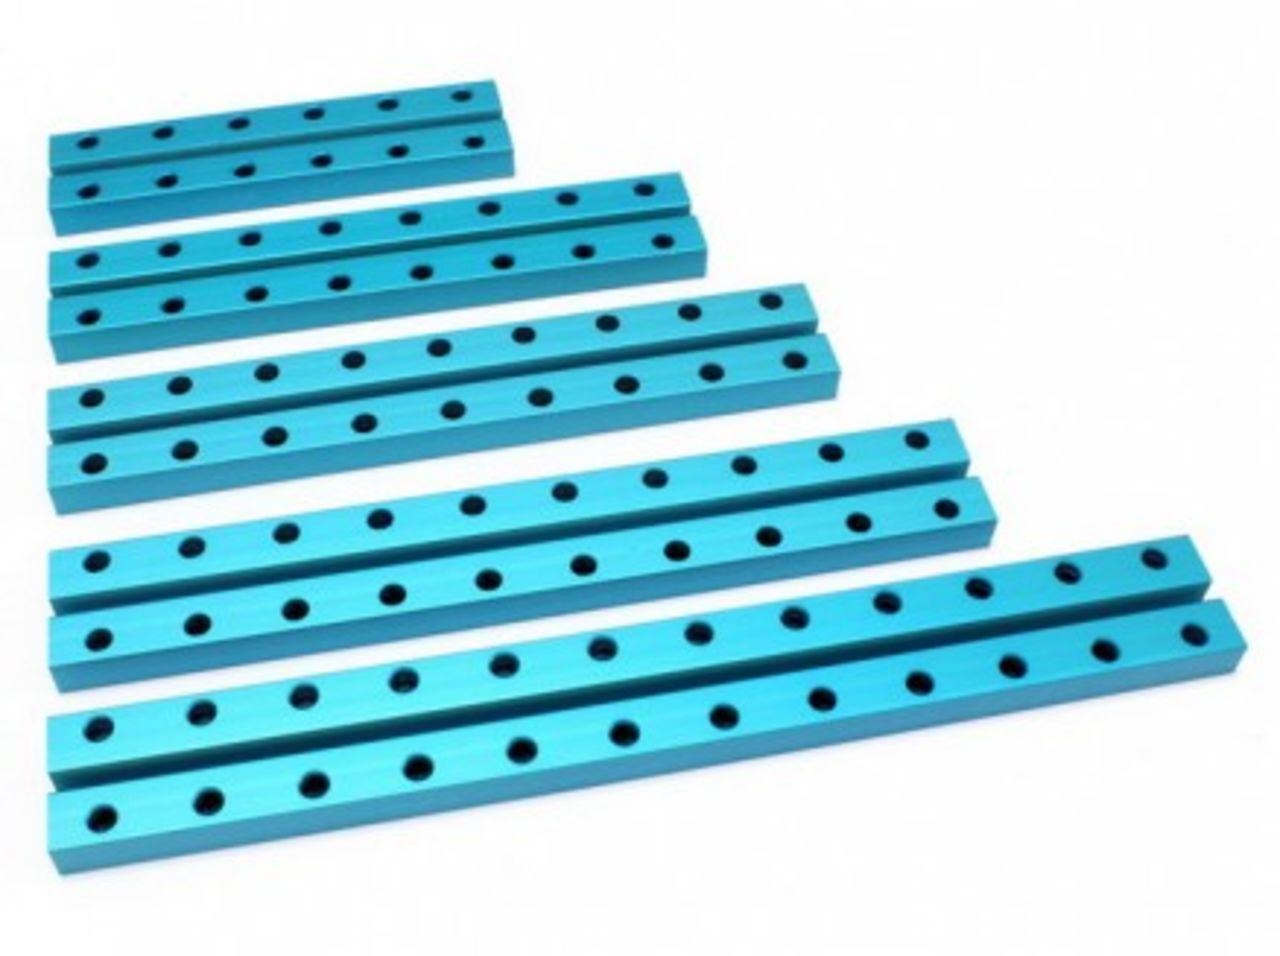 Aluminum beams are available in varying lengths and form the main structure of any Makeblock robot.